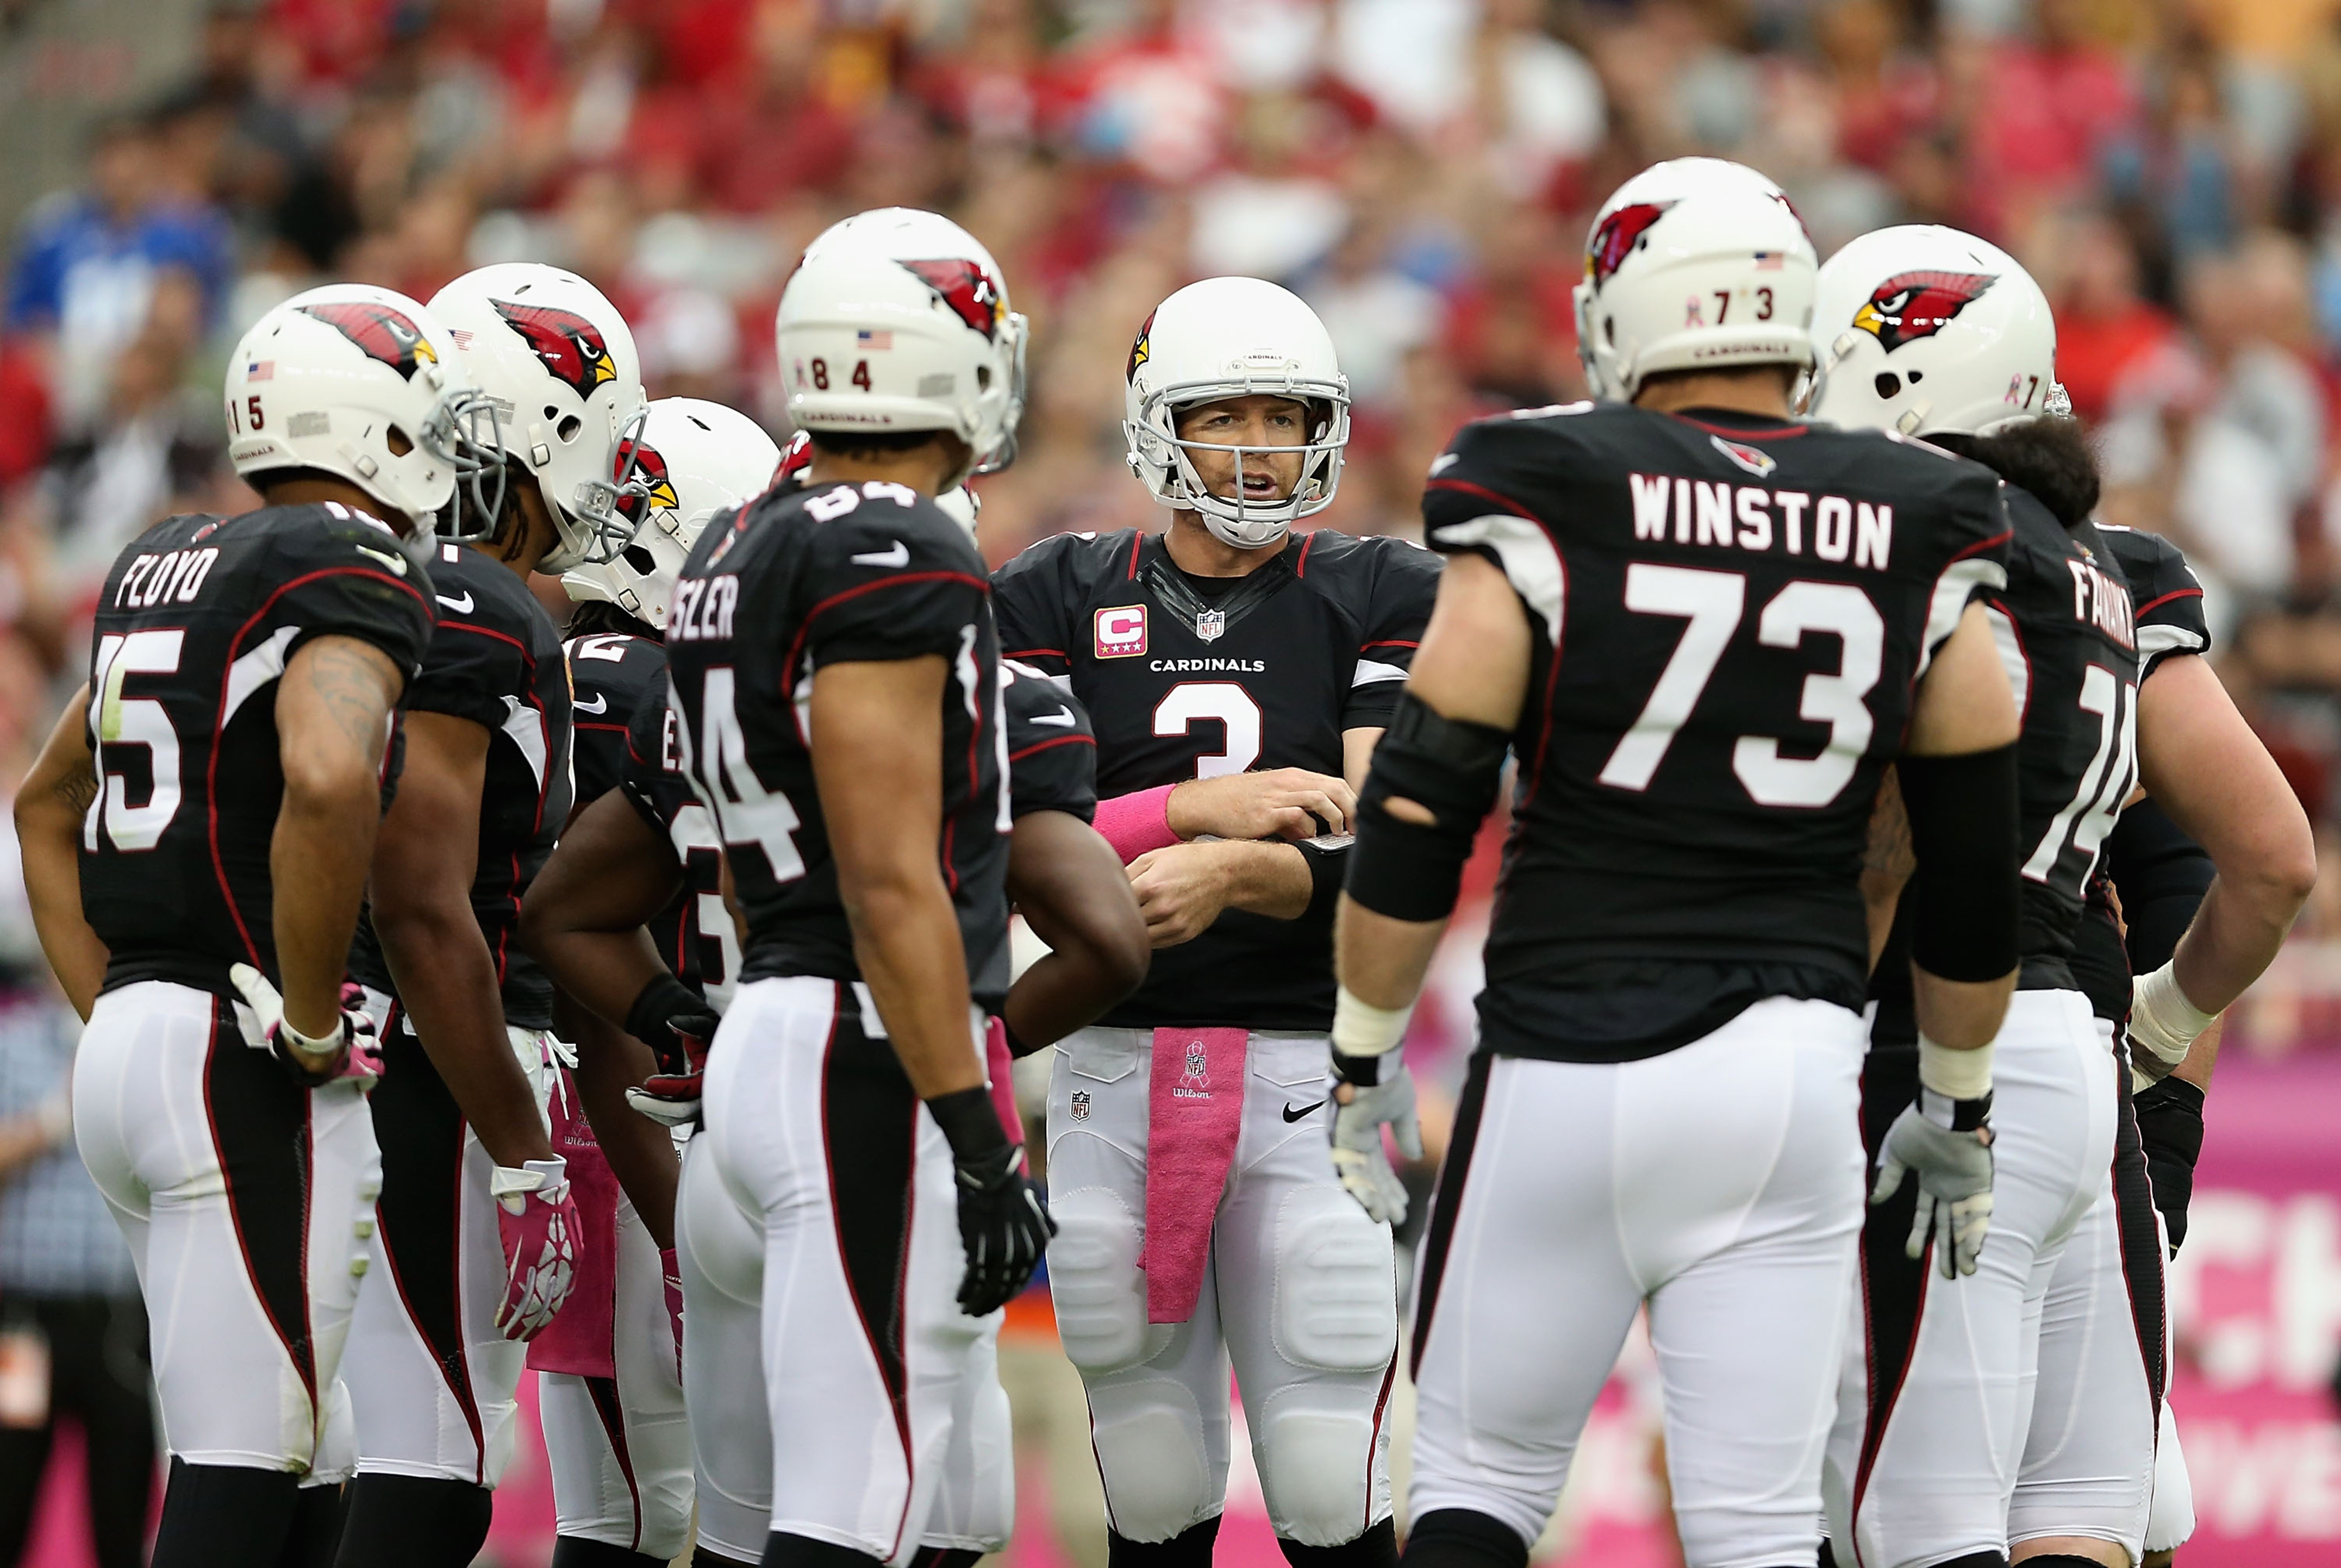 The Cardinals are quietly staking their claim for an NFC Wildcard spot